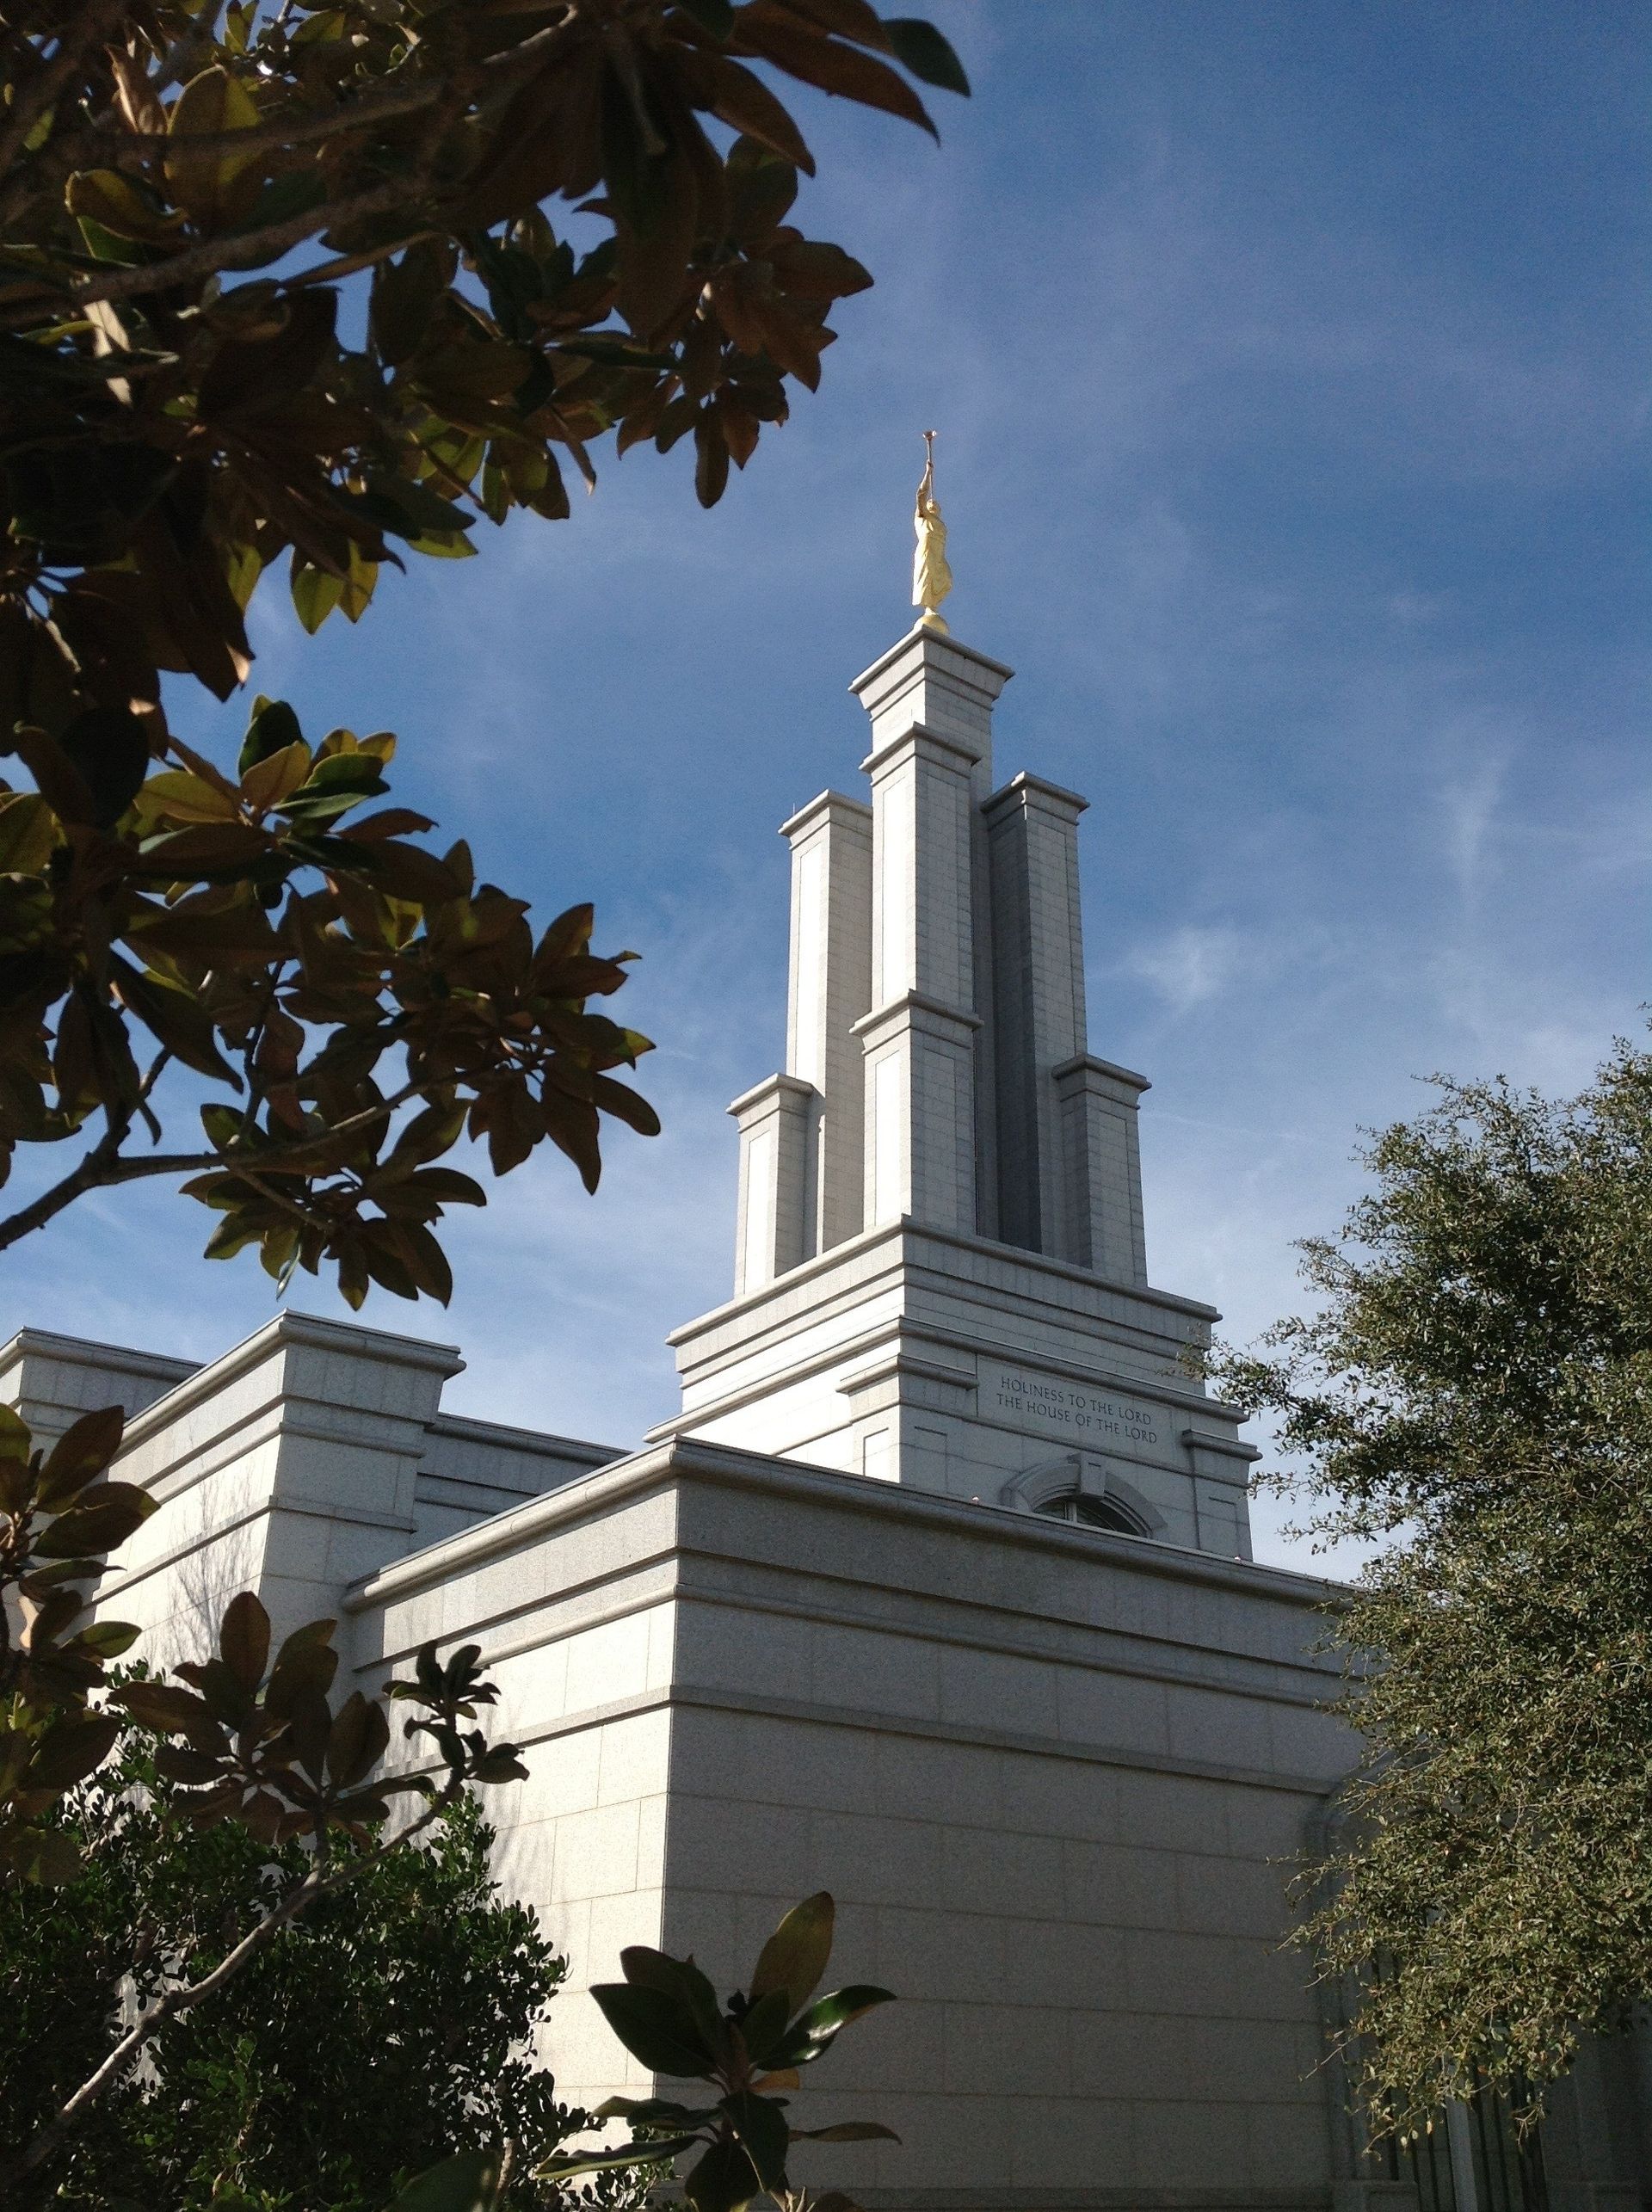 The San Antonio Texas Temple east view, including scenery.